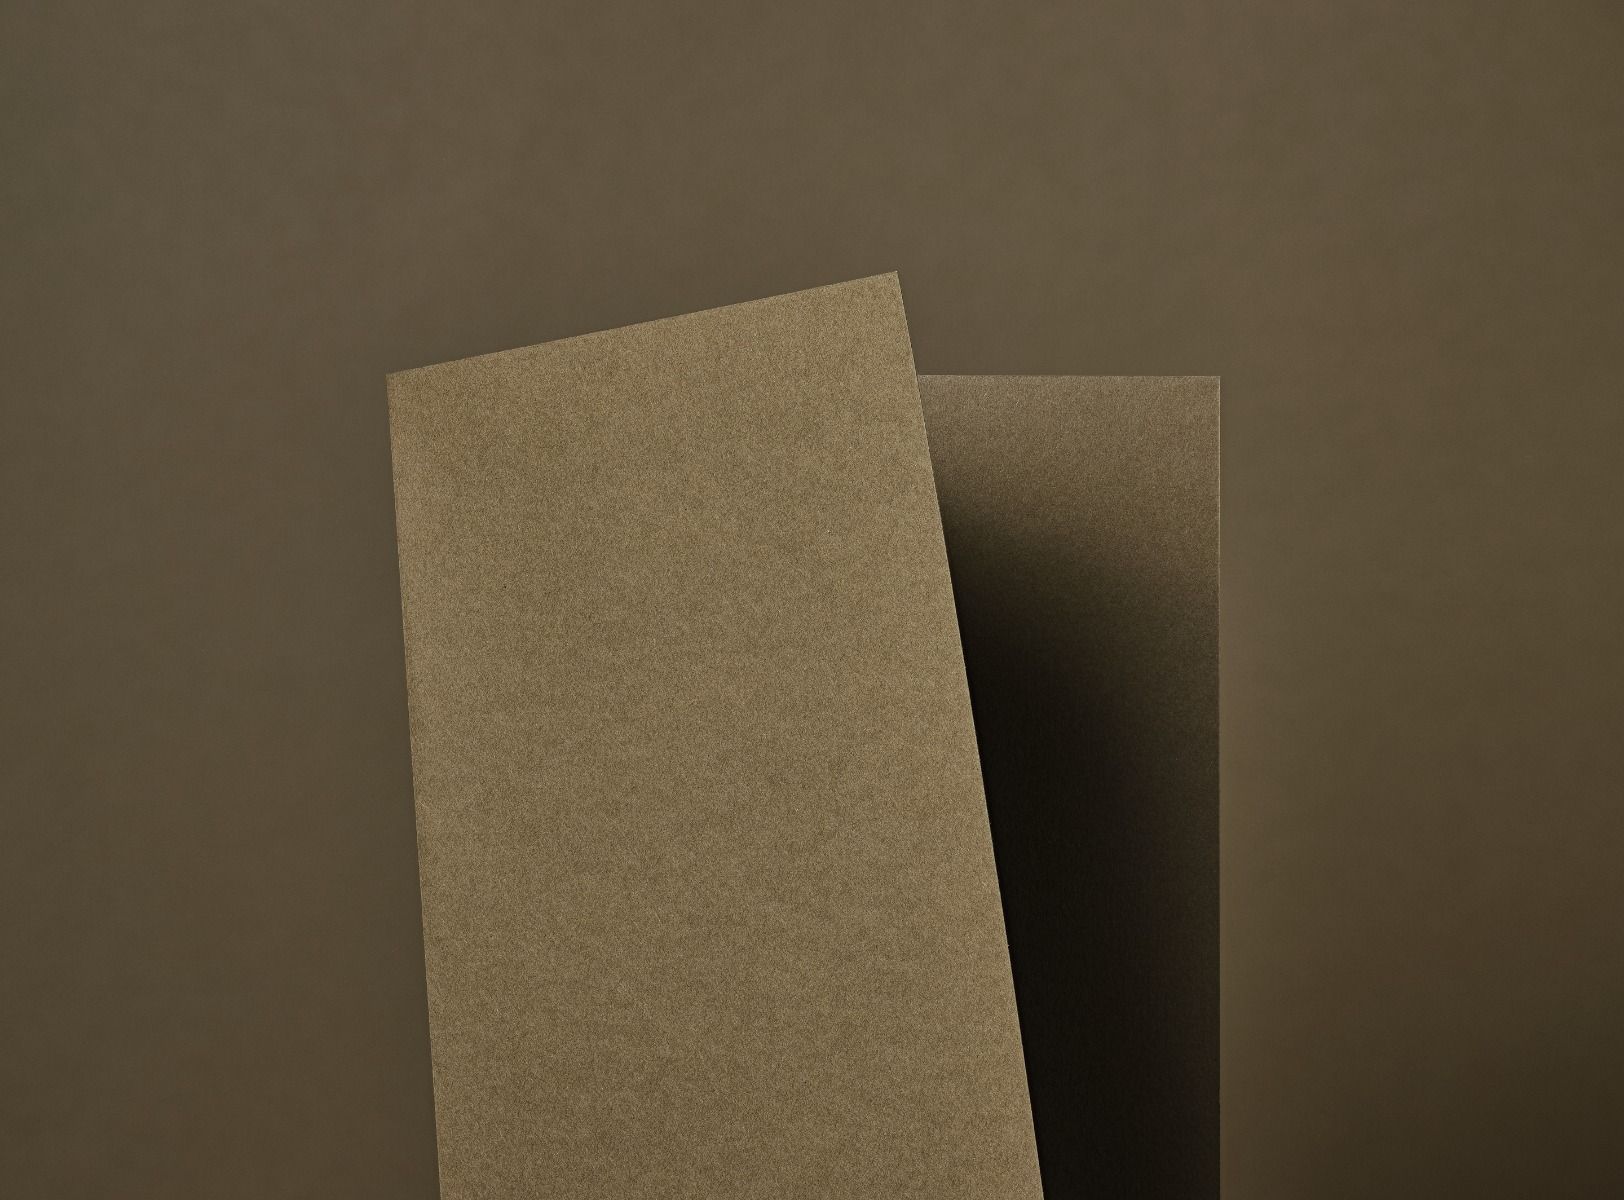 Extract Khaki 8-1/2-x-11 Paper - 50 per package, 380 GSM (140lb Cover)